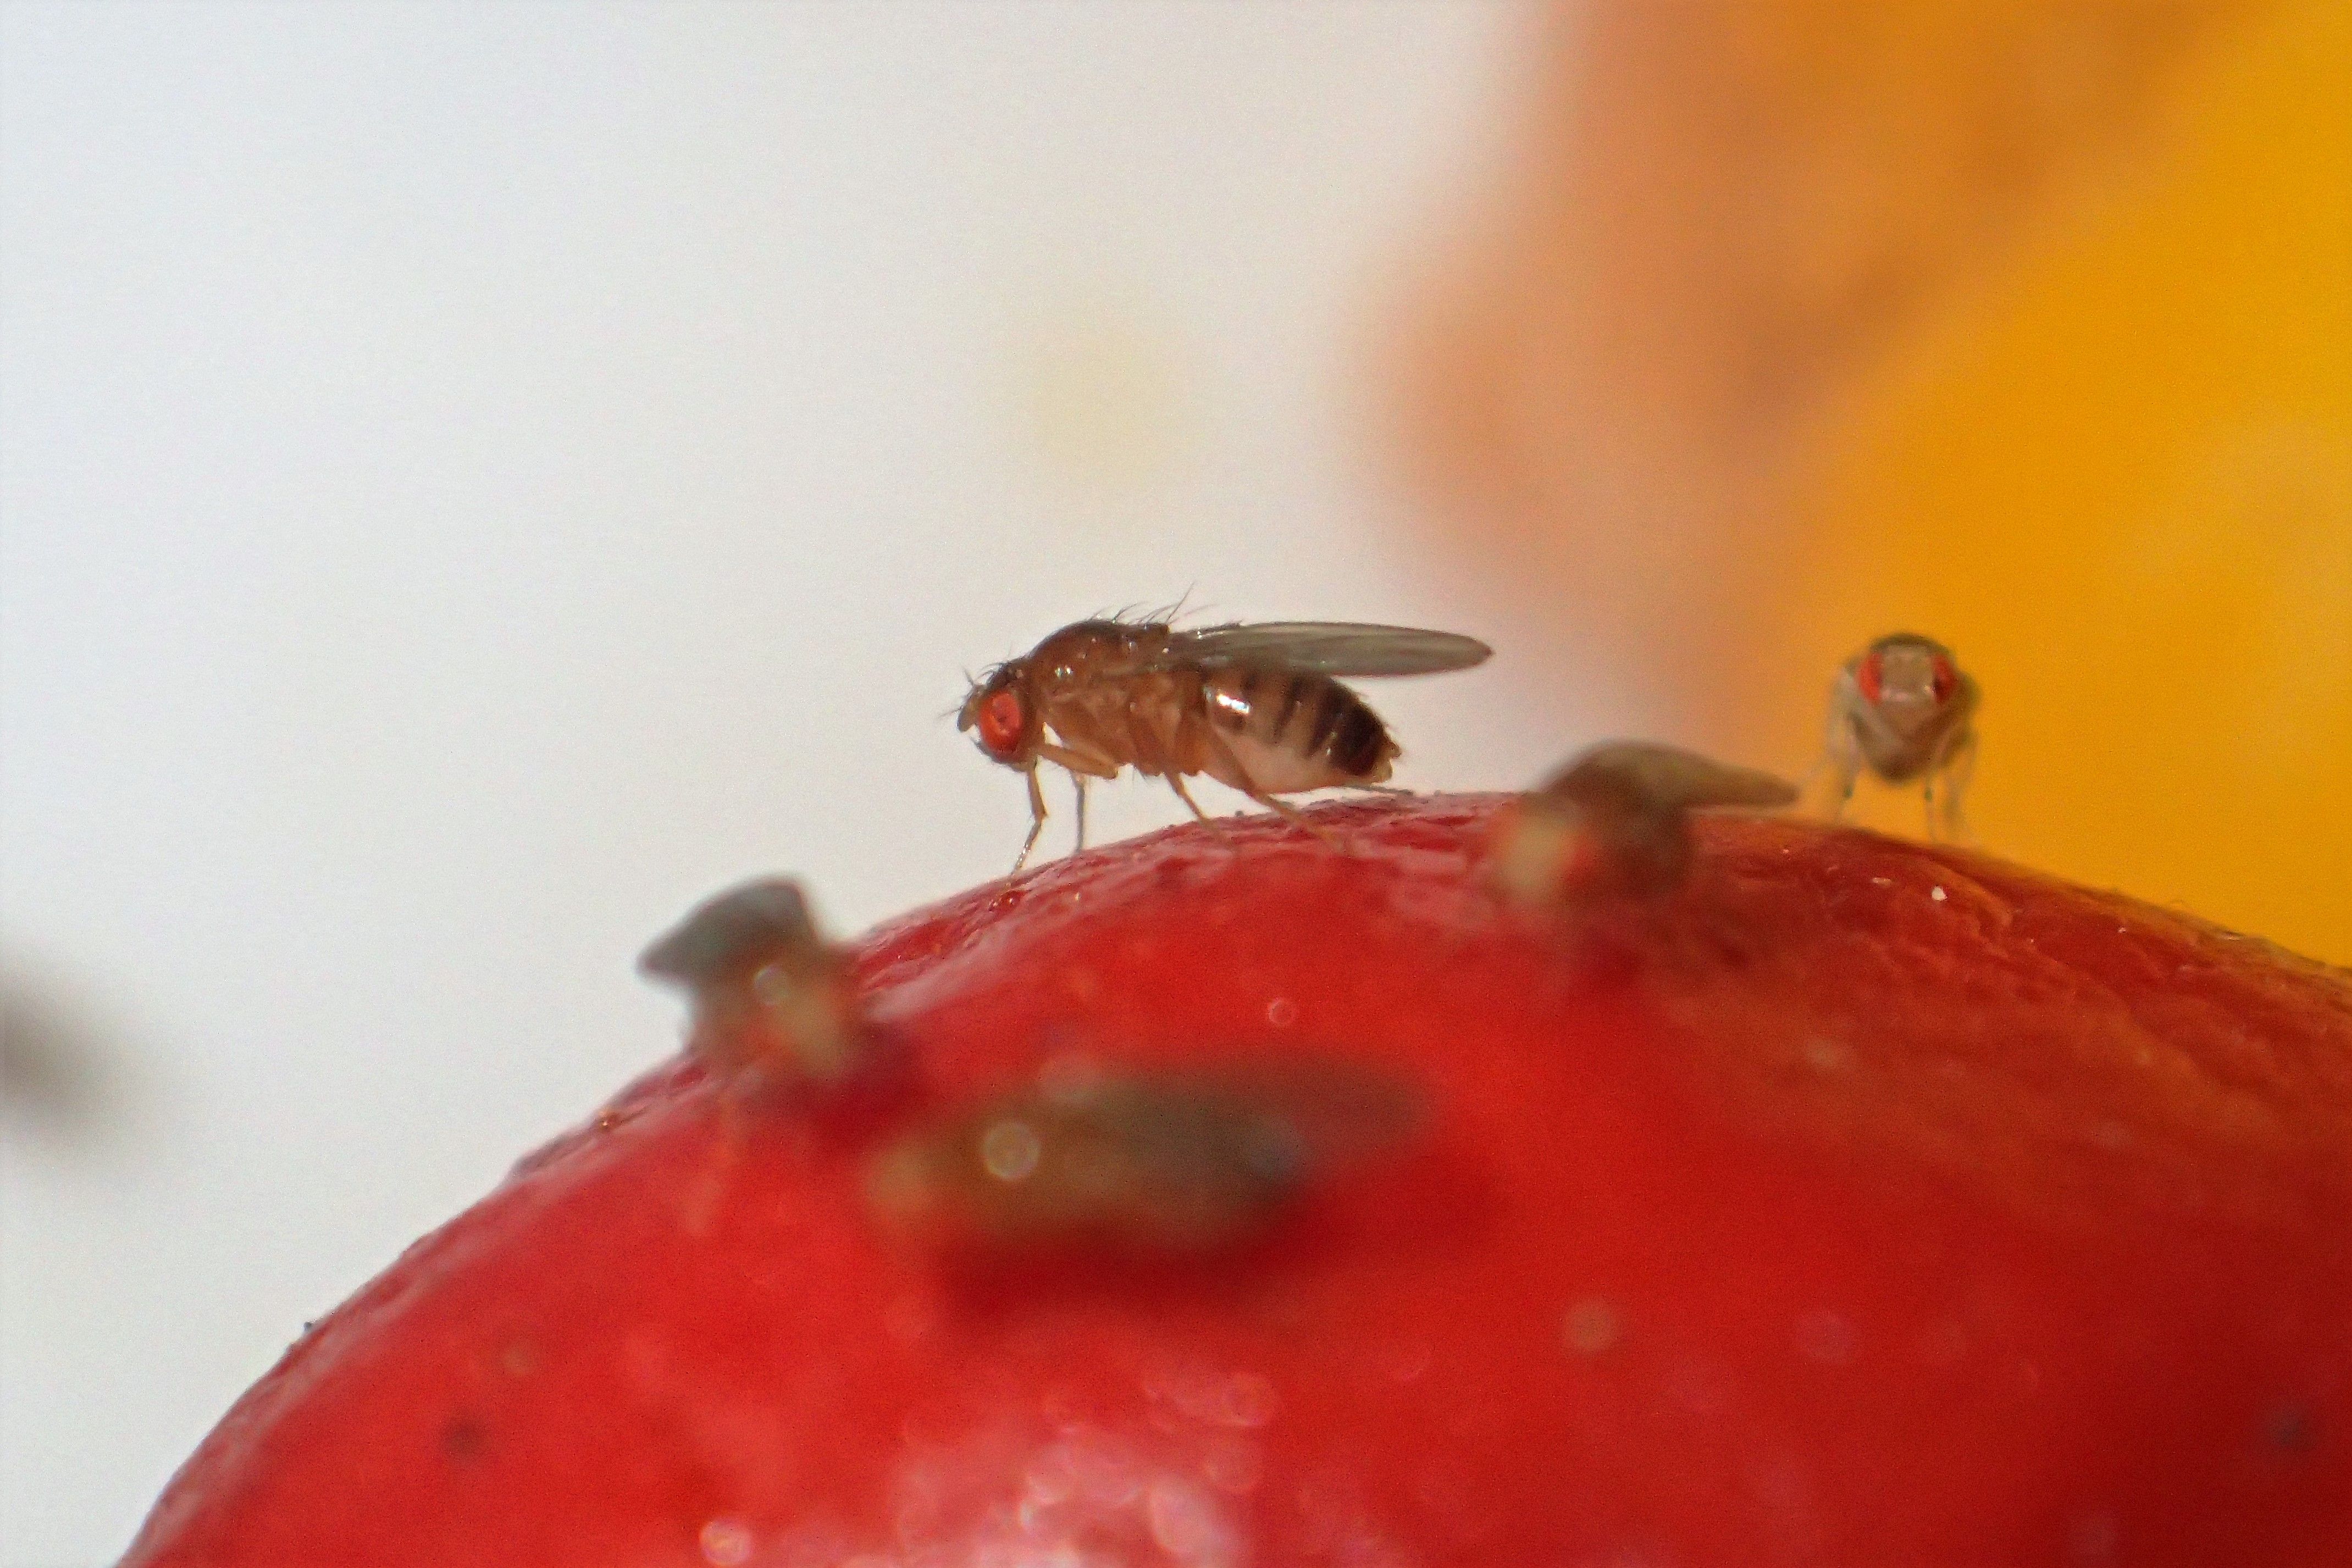 How to kill fruit flies: Easy fly trap tutorial